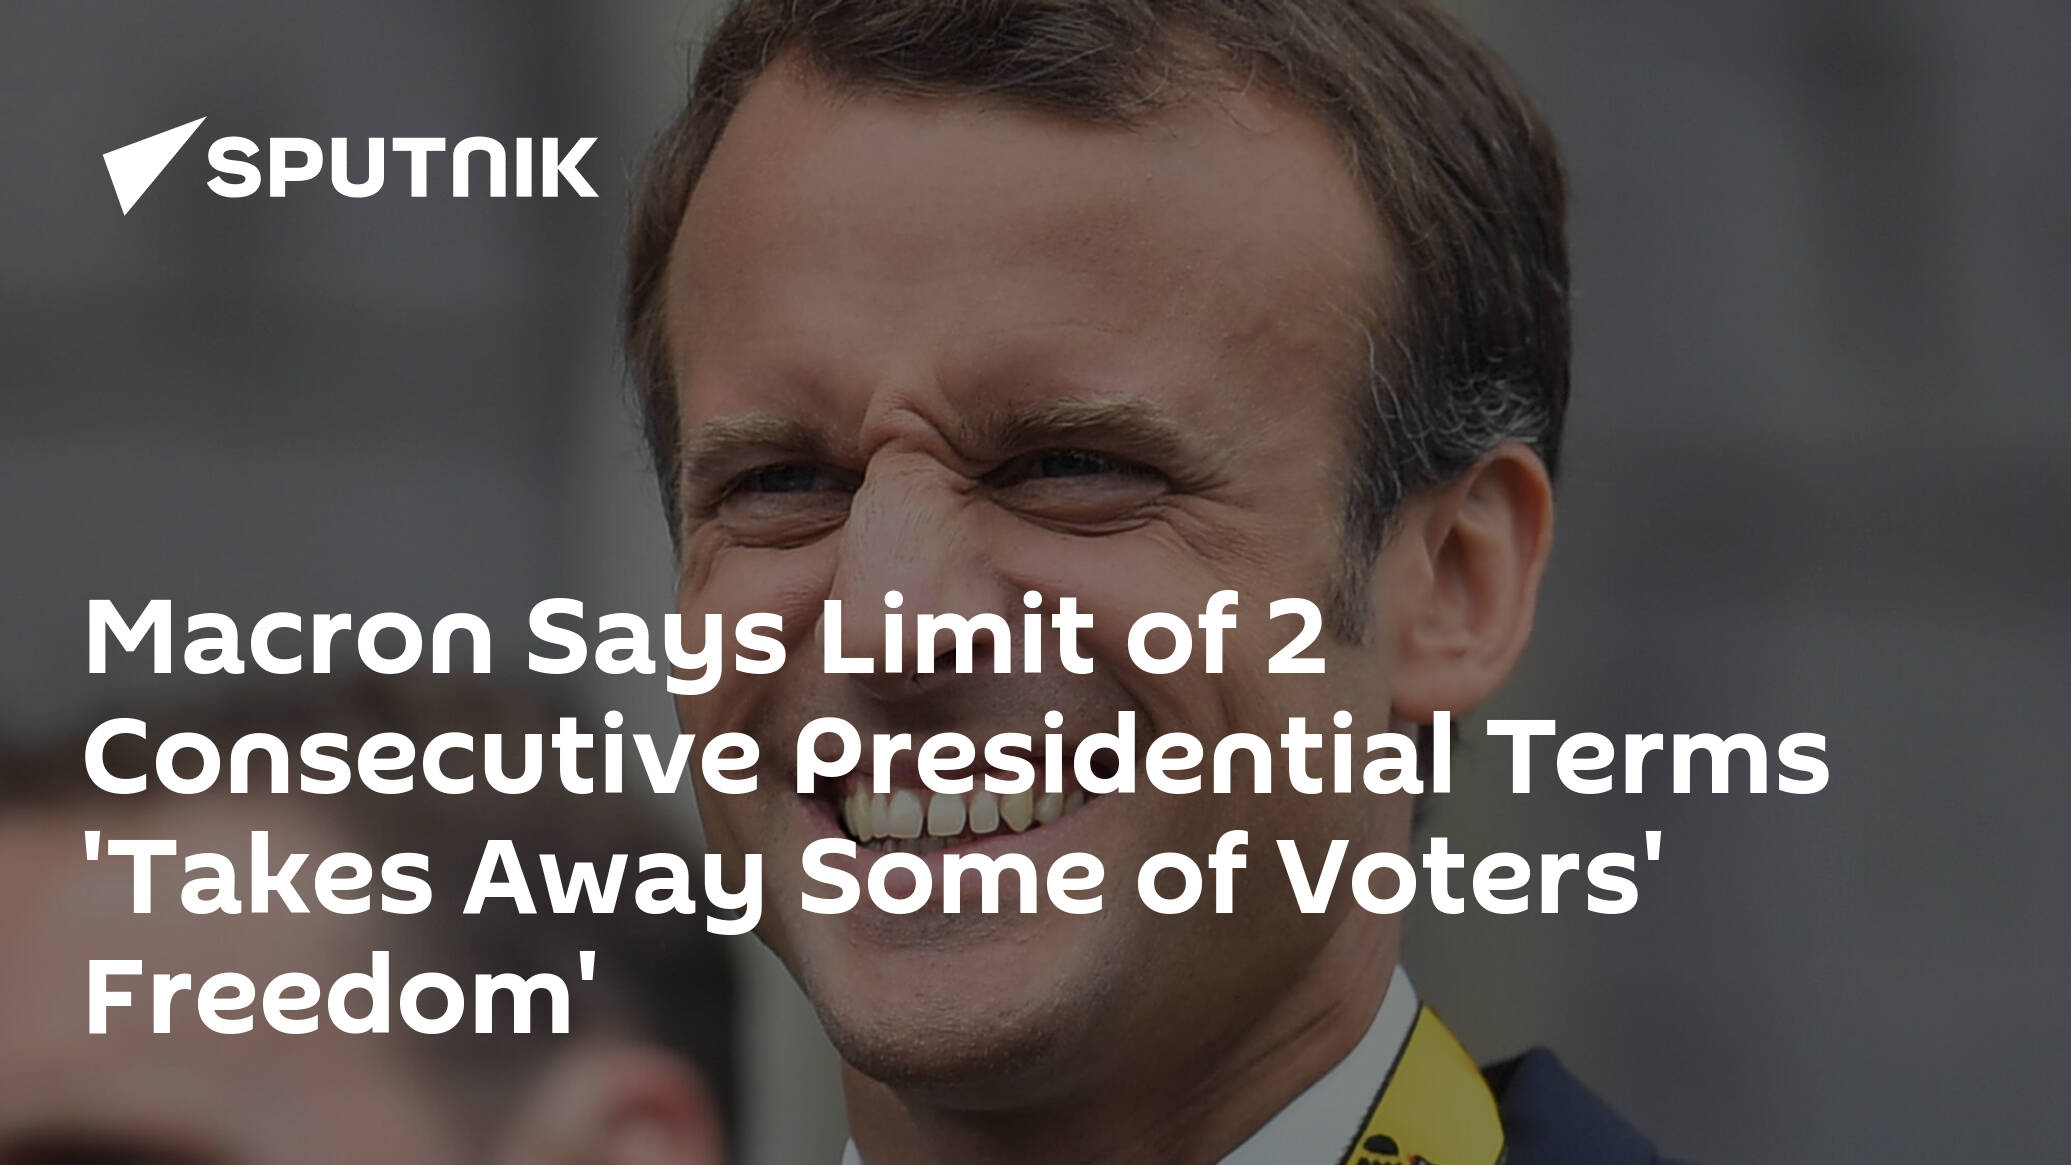 Macron Says Limit of 2 Consecutive Presidential Terms 'Takes Away Some of Voters' Freedom'